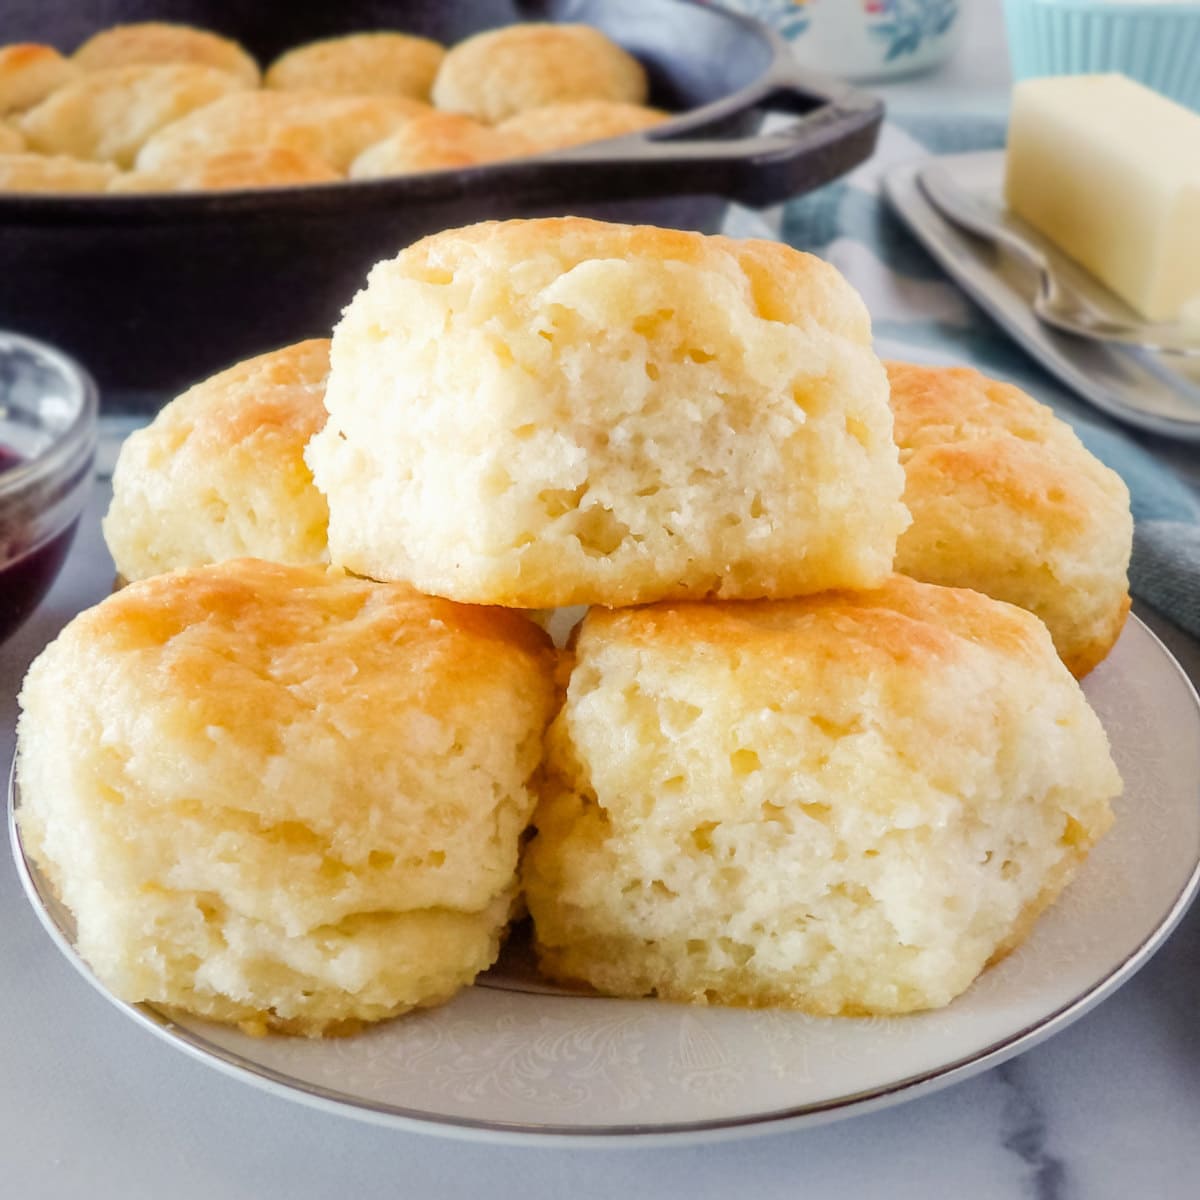 Baked homemade biscuits on a white plate.